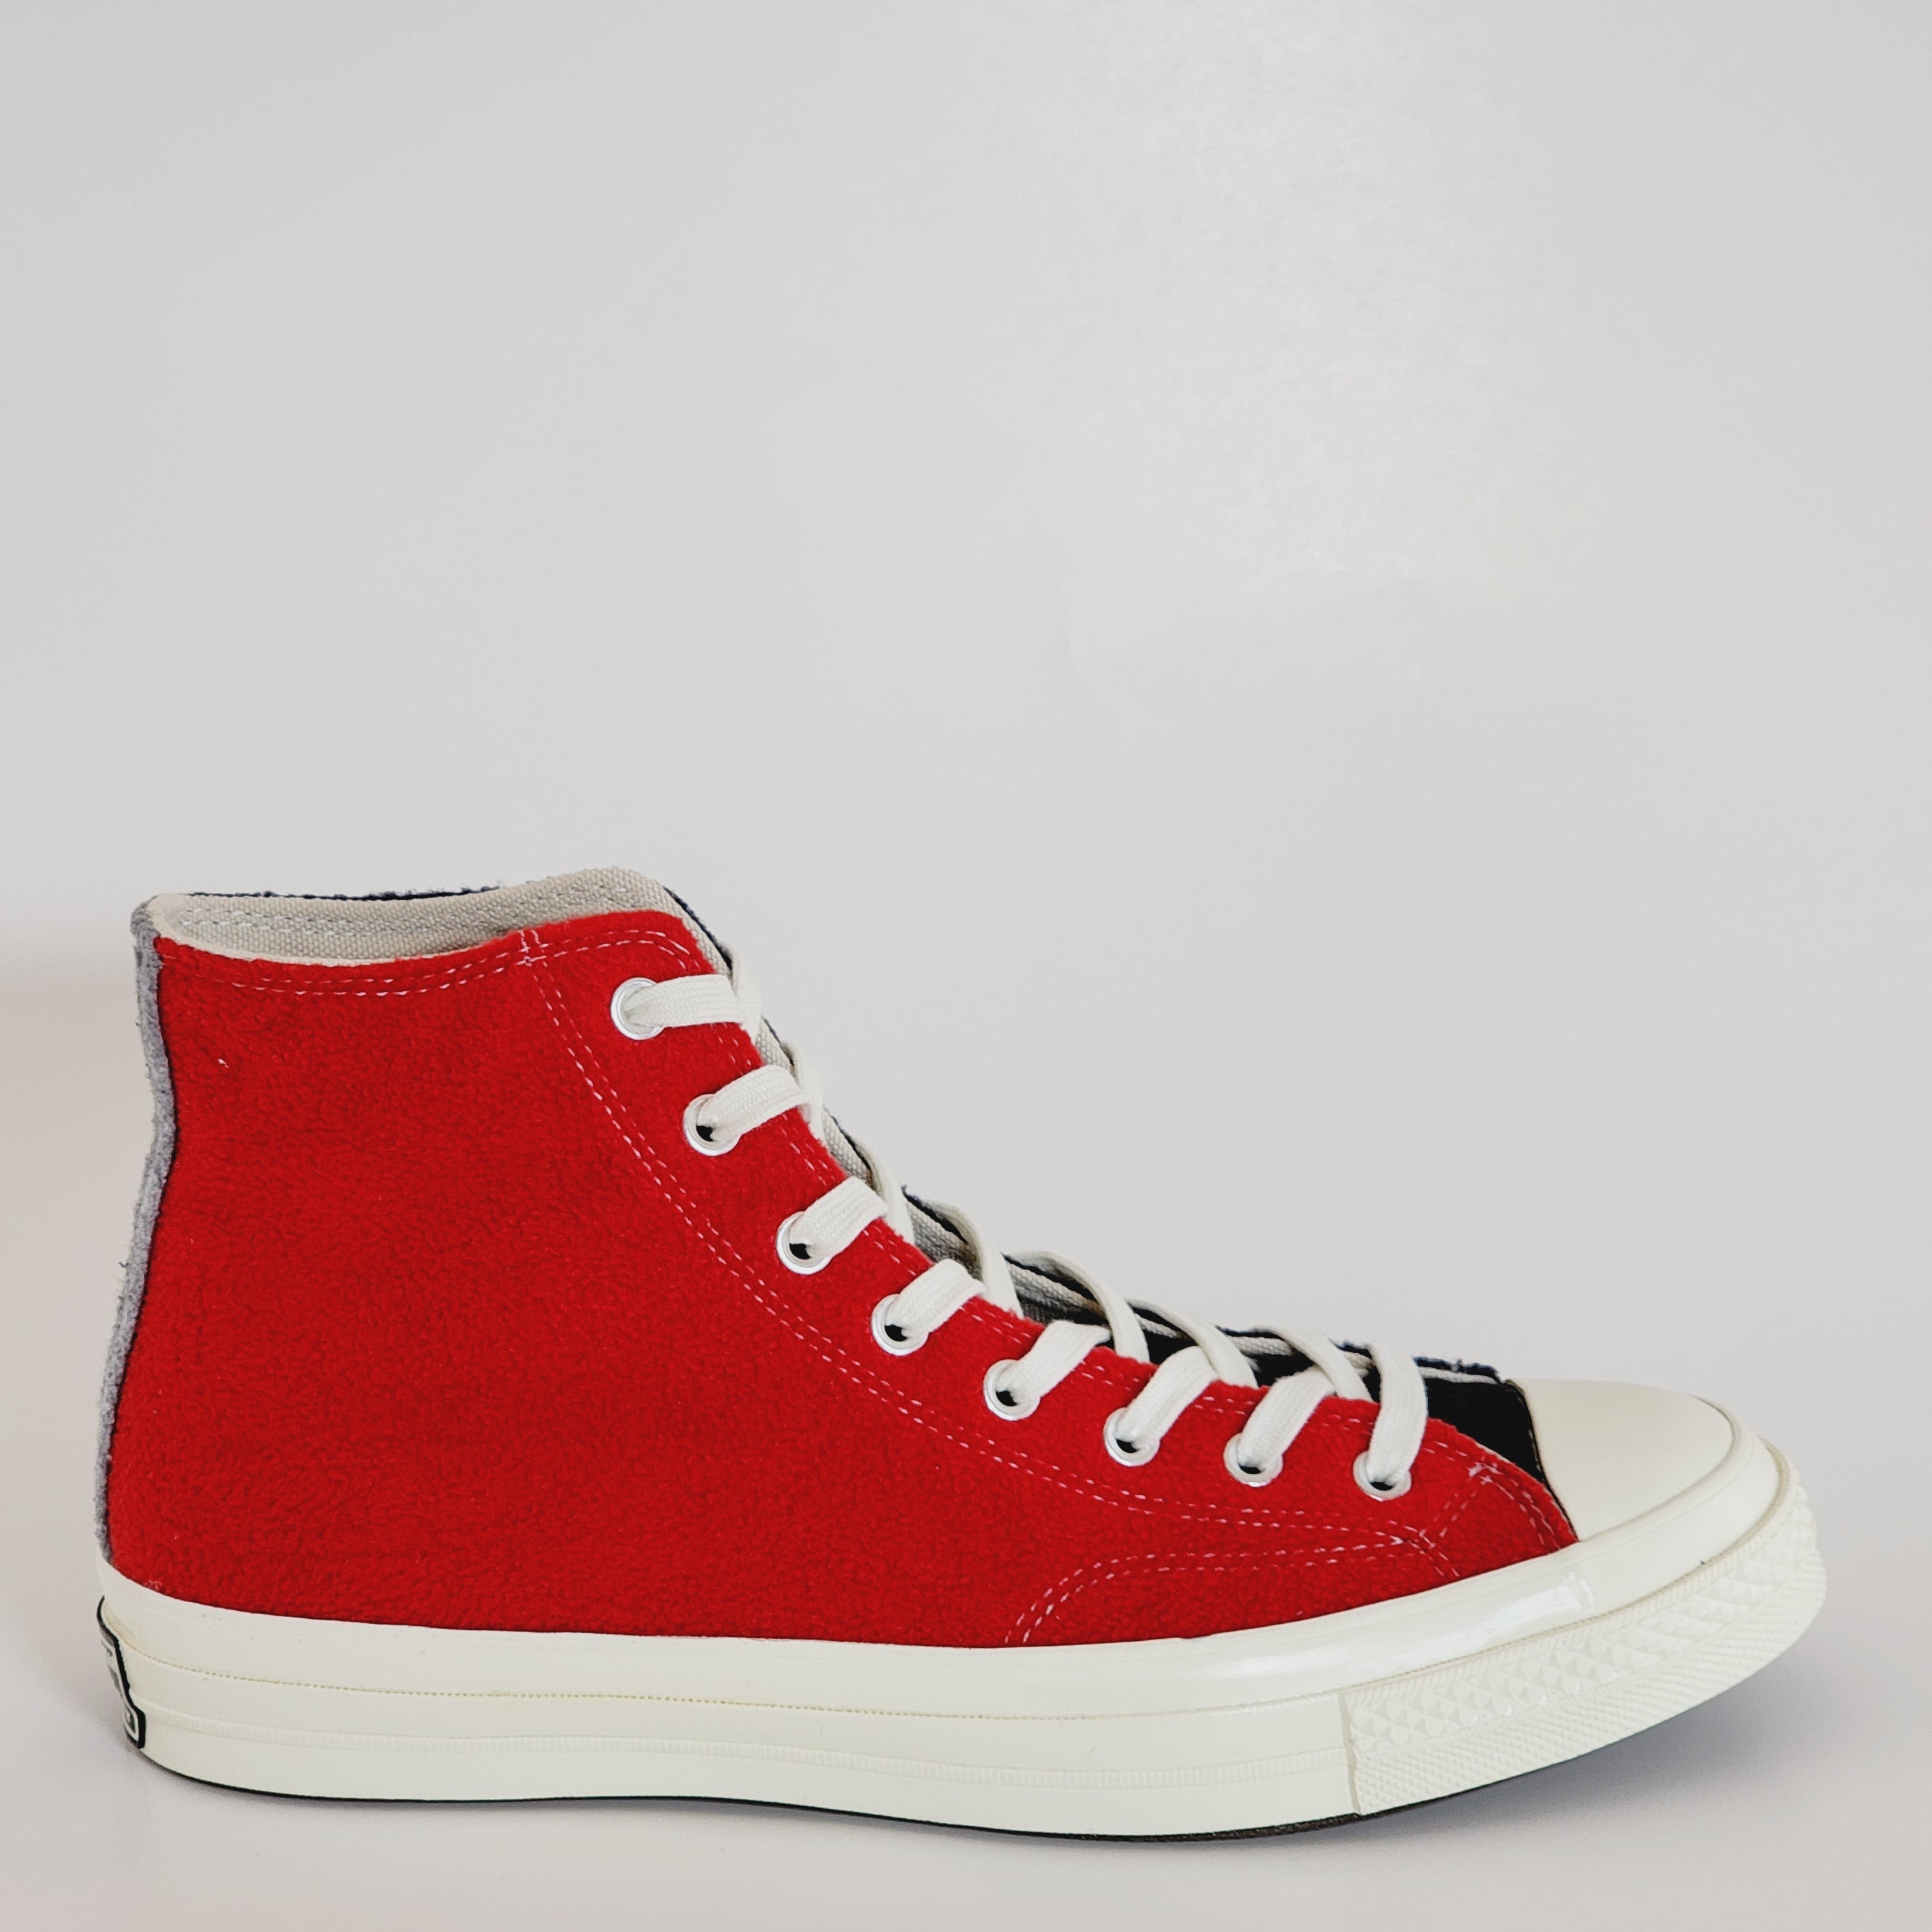 Converse Chuck 70 Hi Upcycle Fleece Red/Blue/Black Unisex Sneakers 172267C NWT